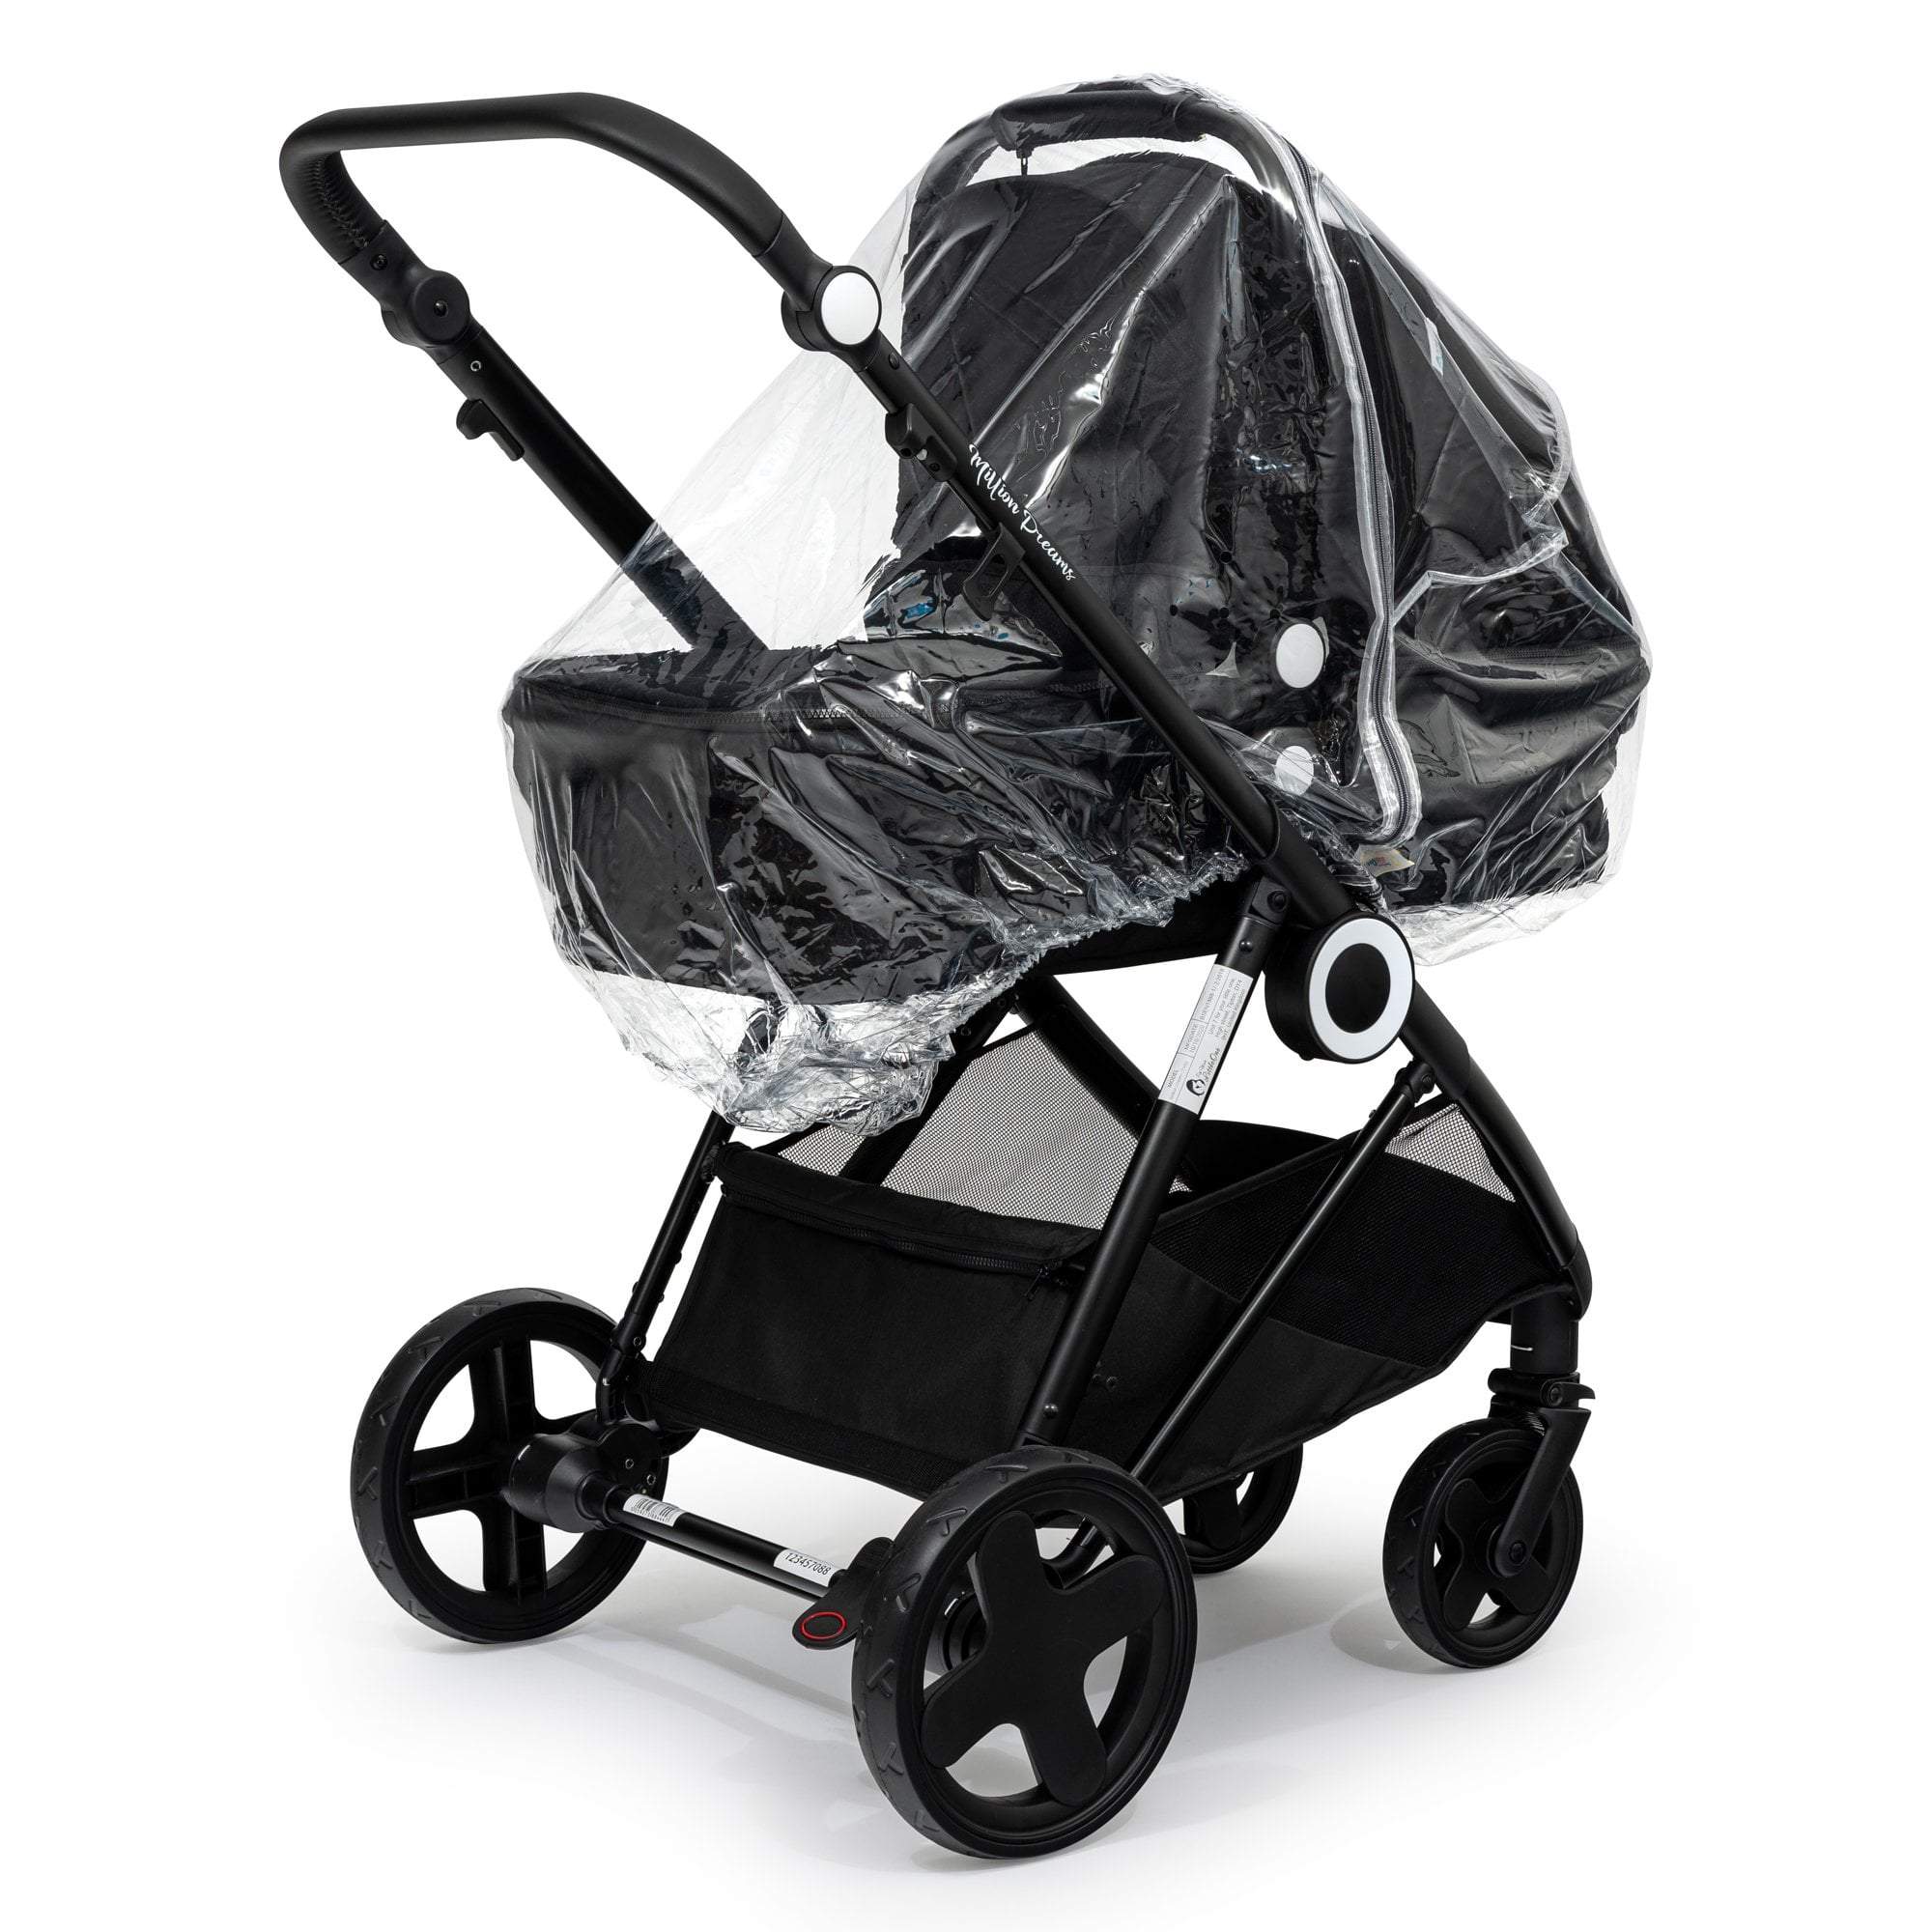 Carrycot Raincover Compatible With Looping - Fits All Models - For Your Little One